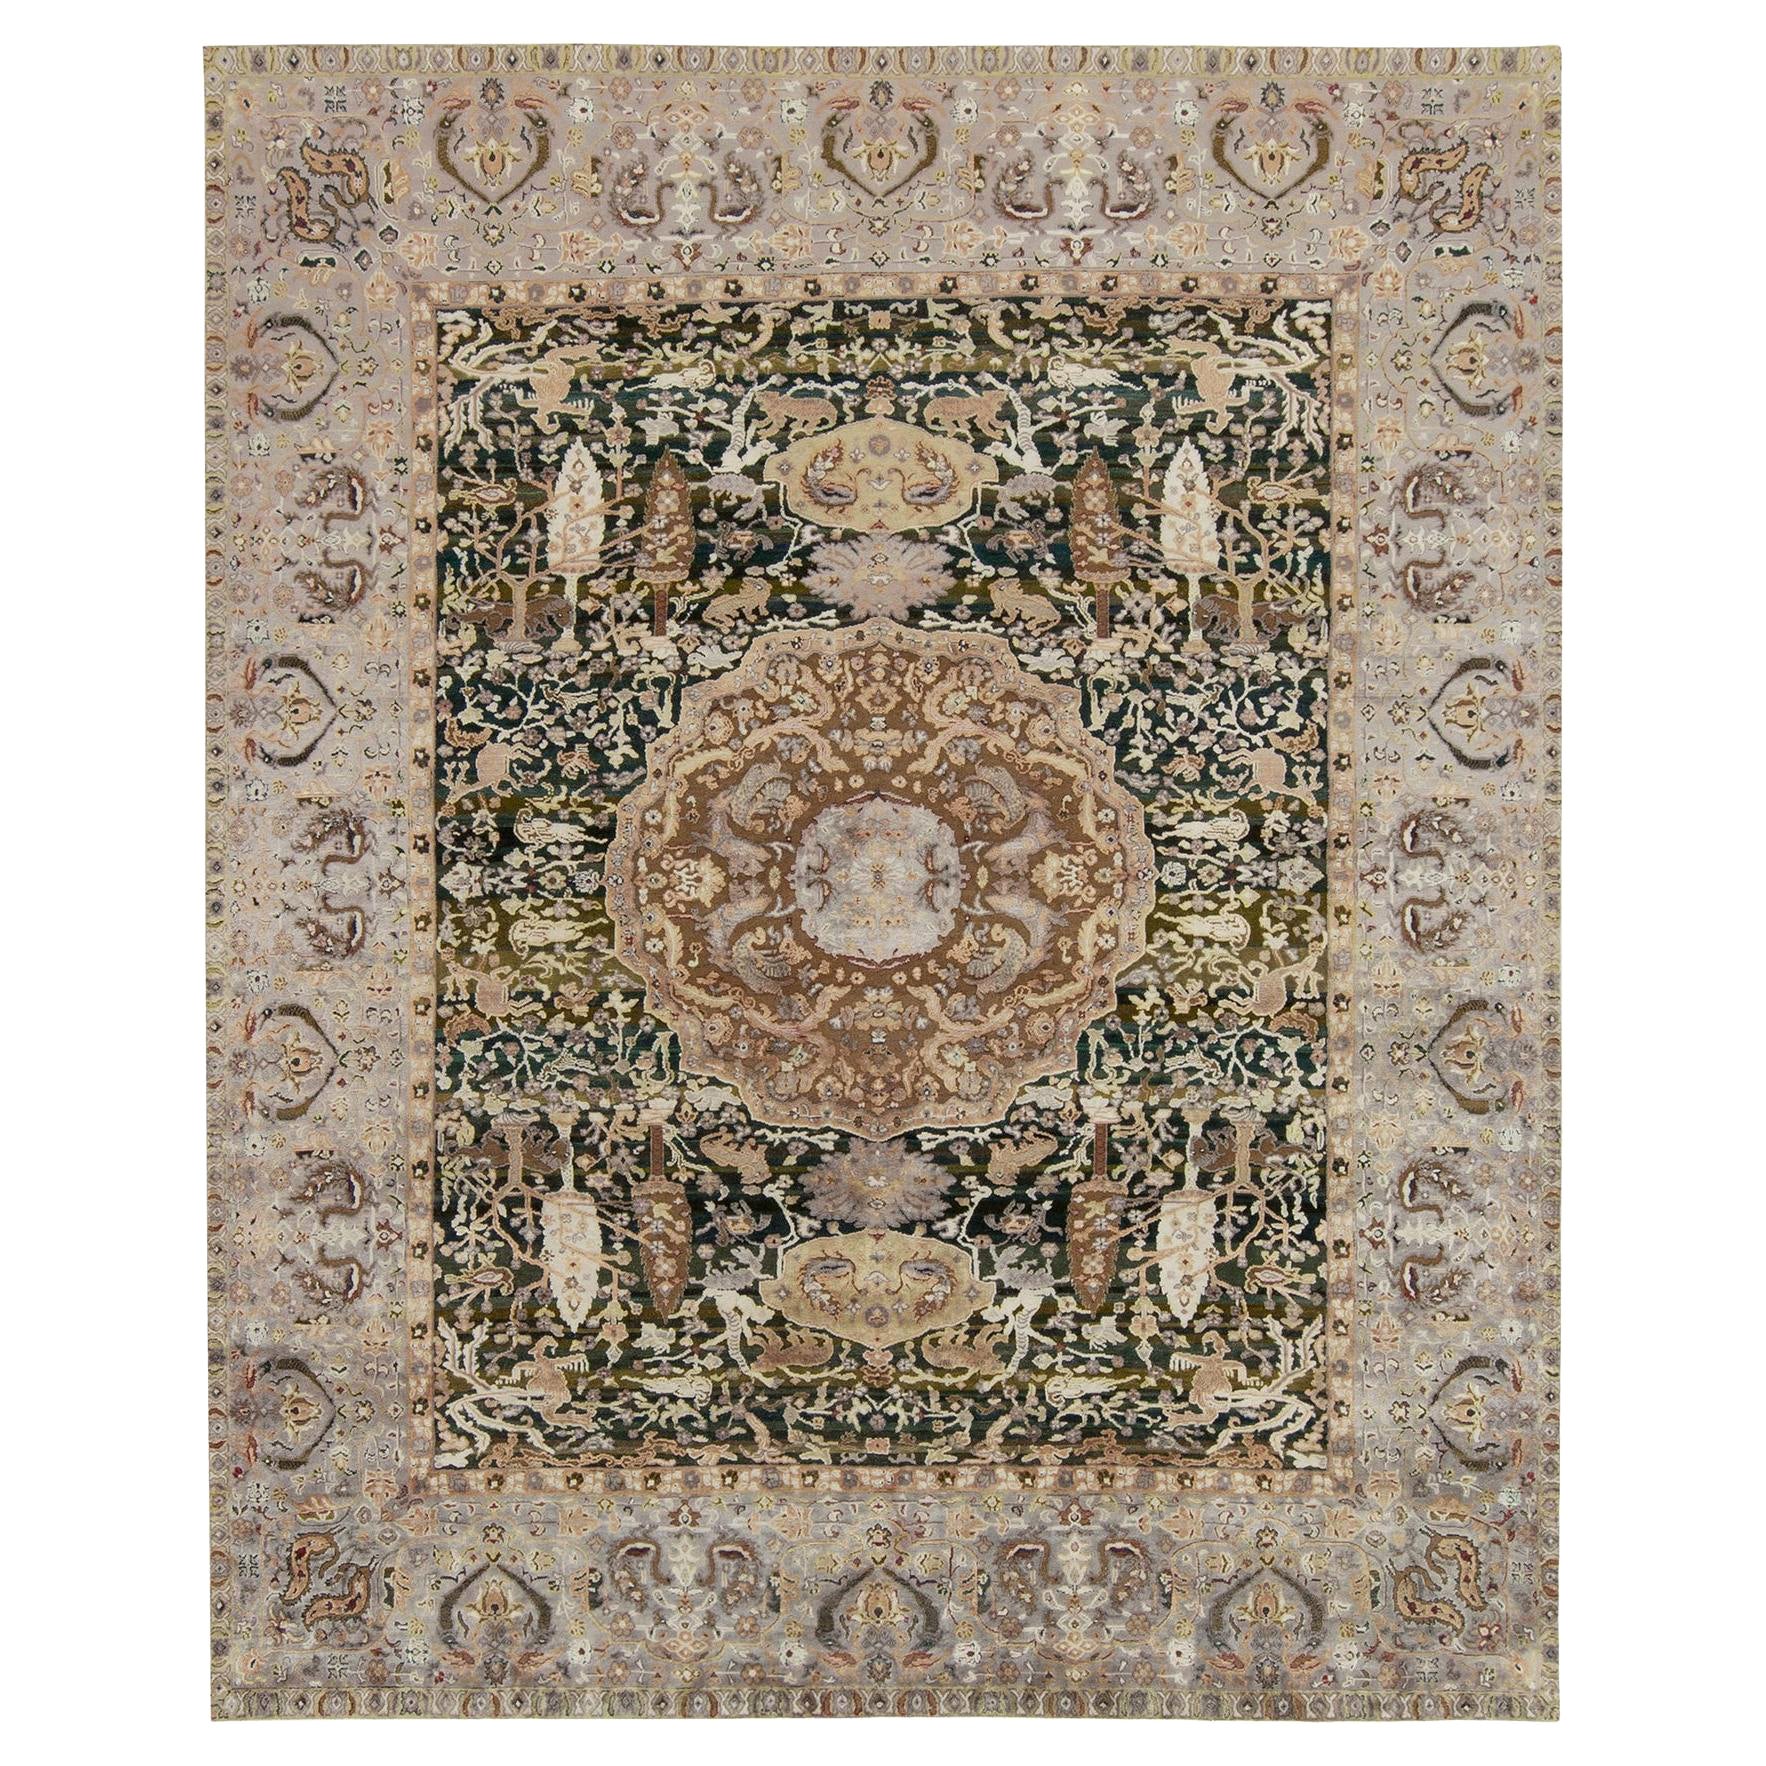 Rug & Kilim’s Classic Style Rug in Grey and Beige-Brown Floral Pattern